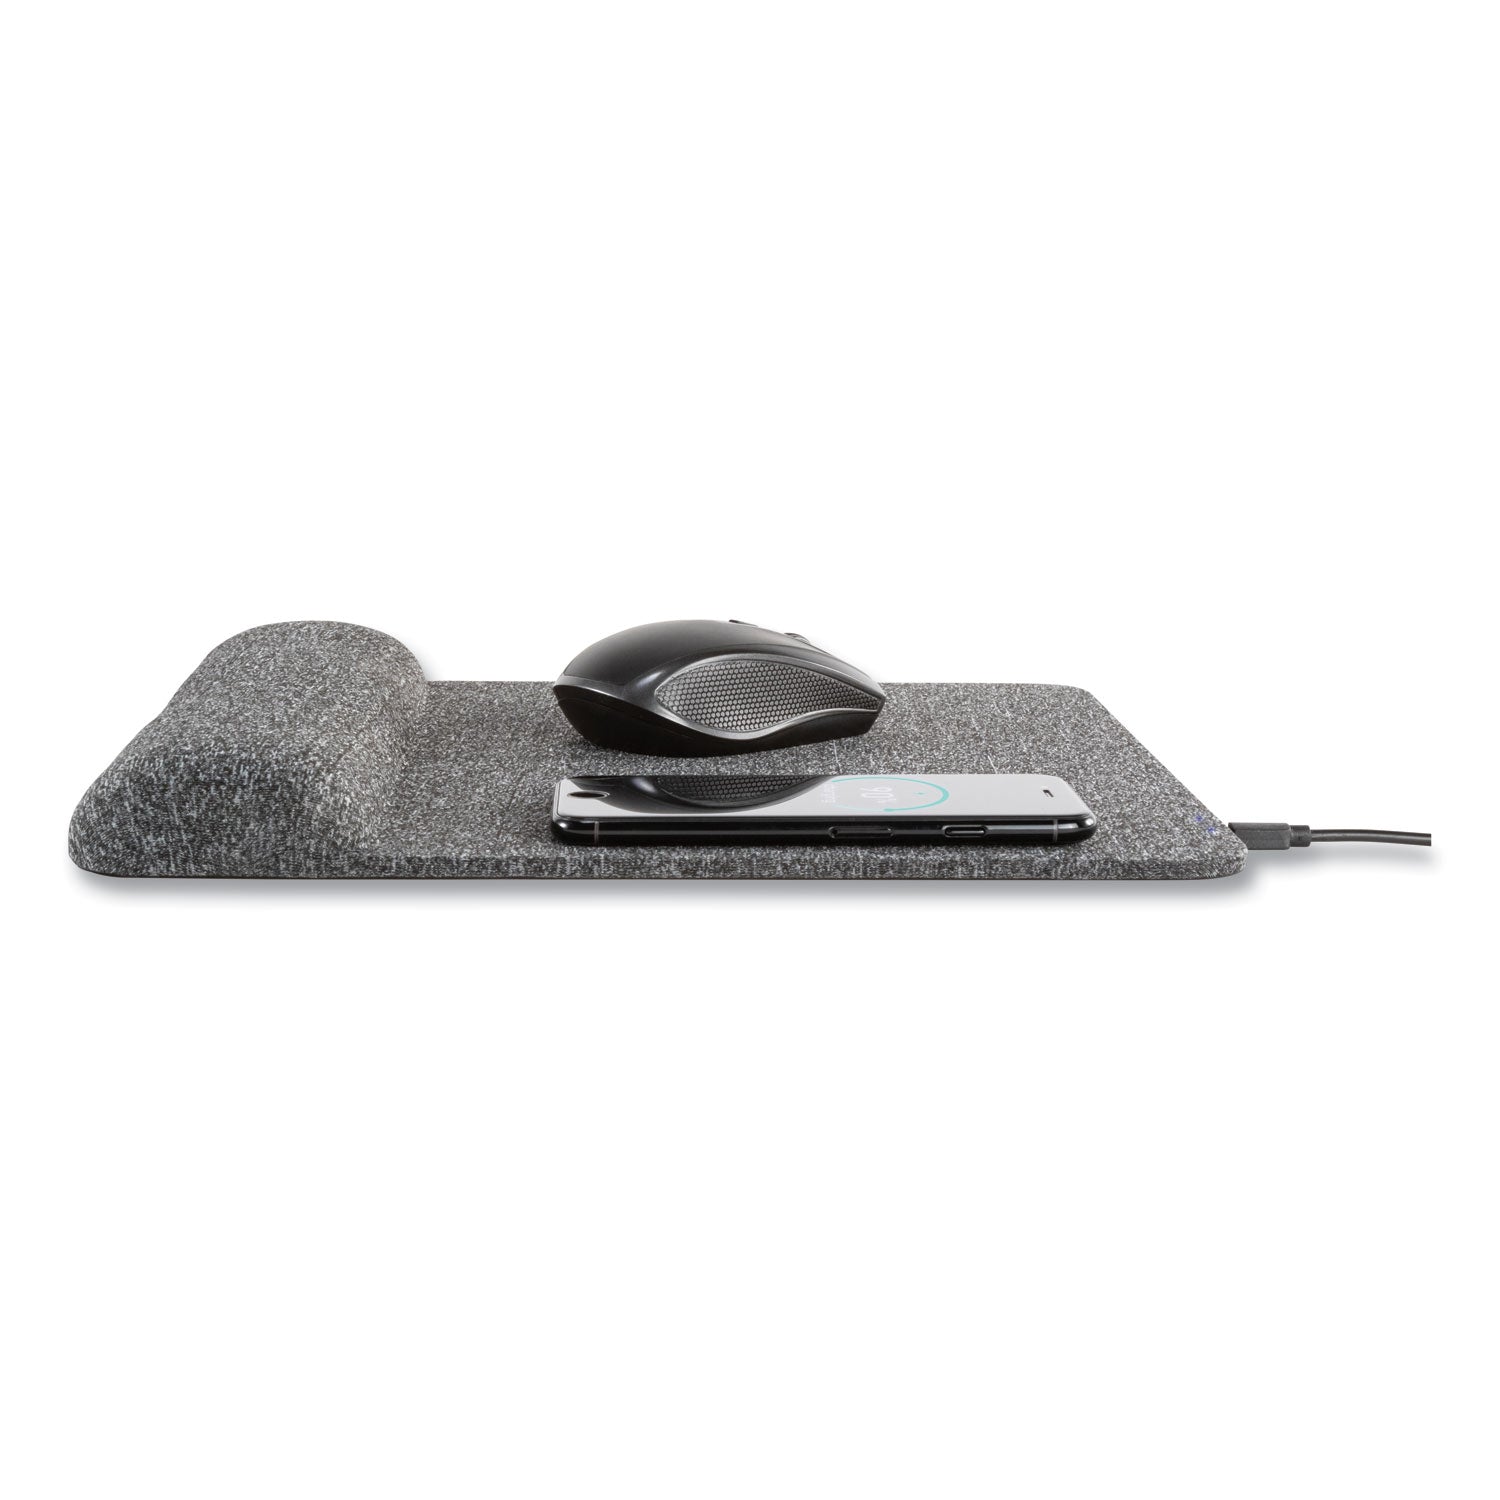 powertrack-plush-wireless-charging-mouse-pad-with-wrist-rest-118-x-116-gray_asp32304 - 3